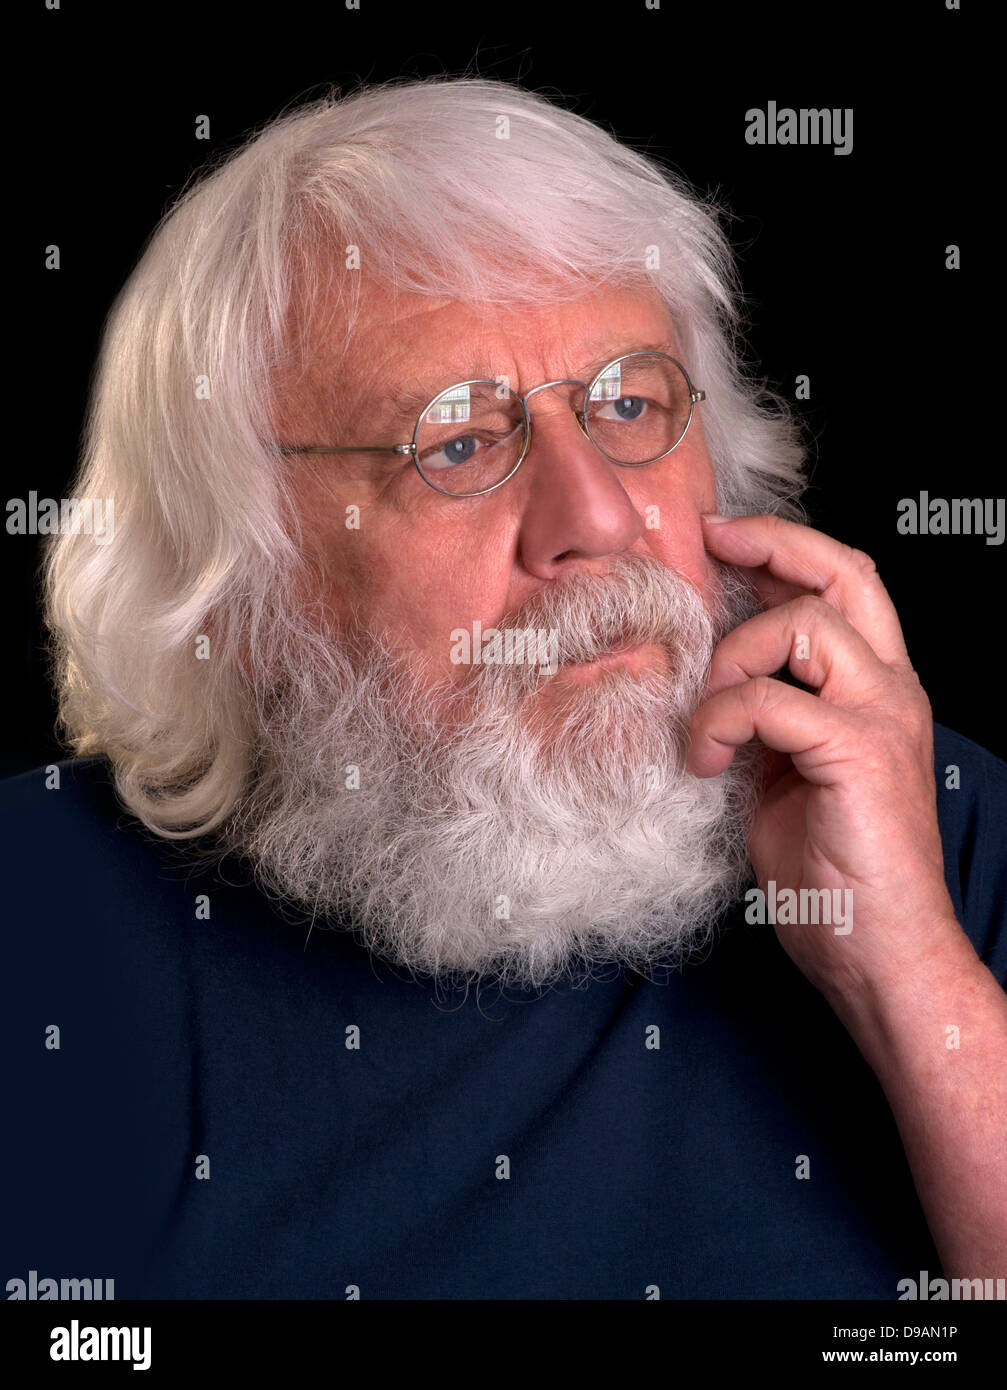 Elderly man with full beard and glasses thinking with his hand at the chin Stock Photo